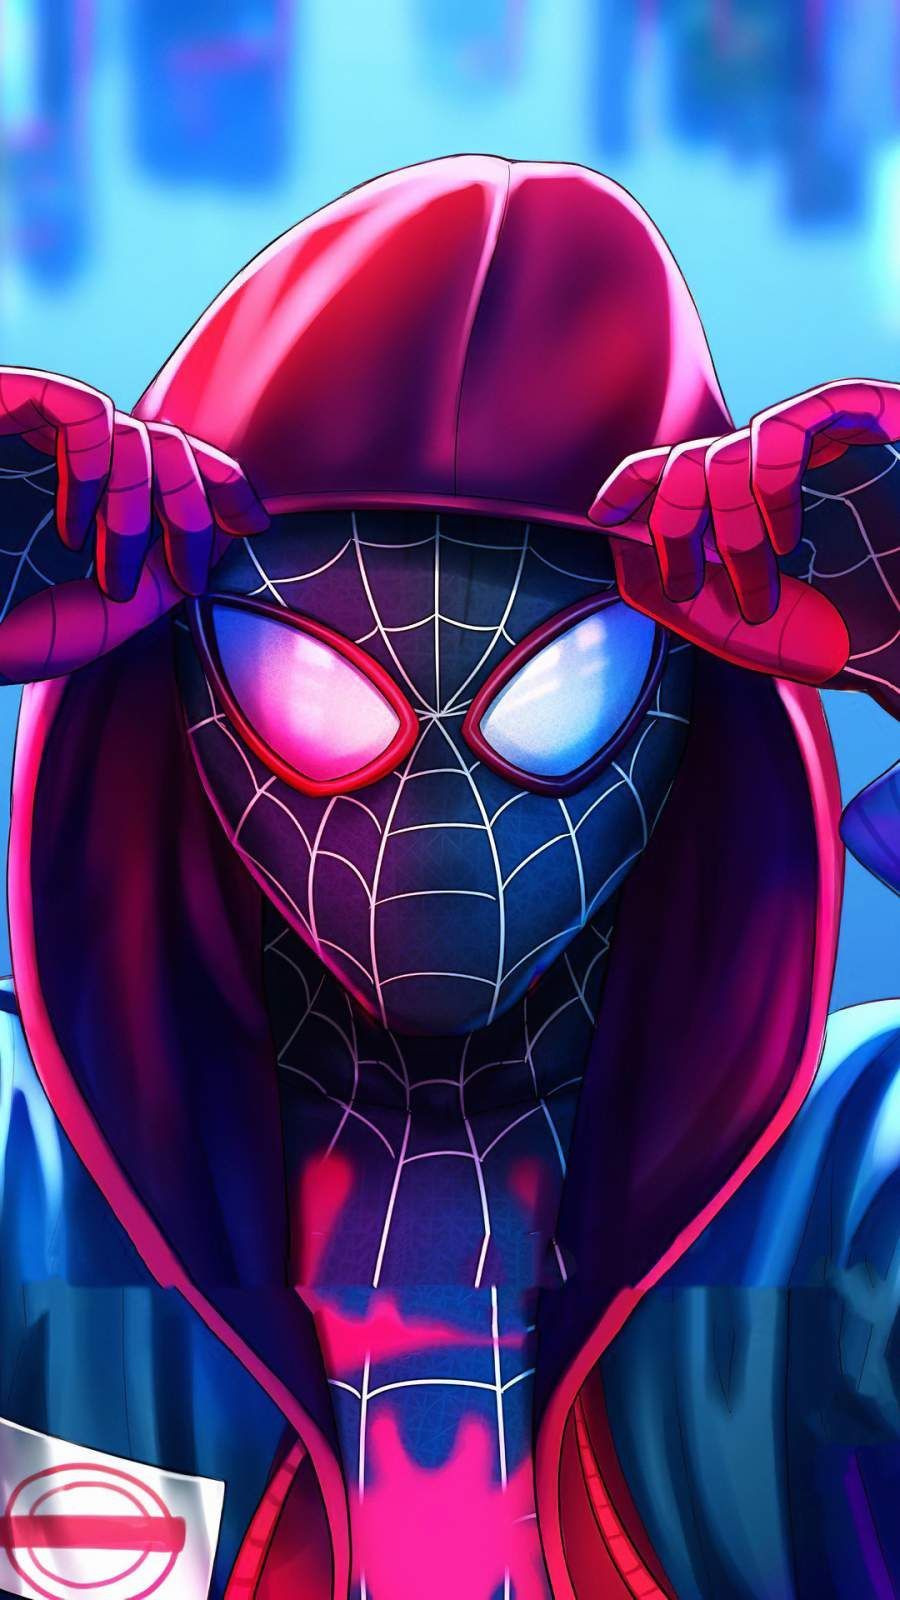 Download Miles Spiderman Hoodie Mobile Wallpaper For Your Android, IPhone Wallpaper Or IPad Tablet Wallpap In 2020. Spiderman Artwork, Spiderman Art, Superhero Wallpaper